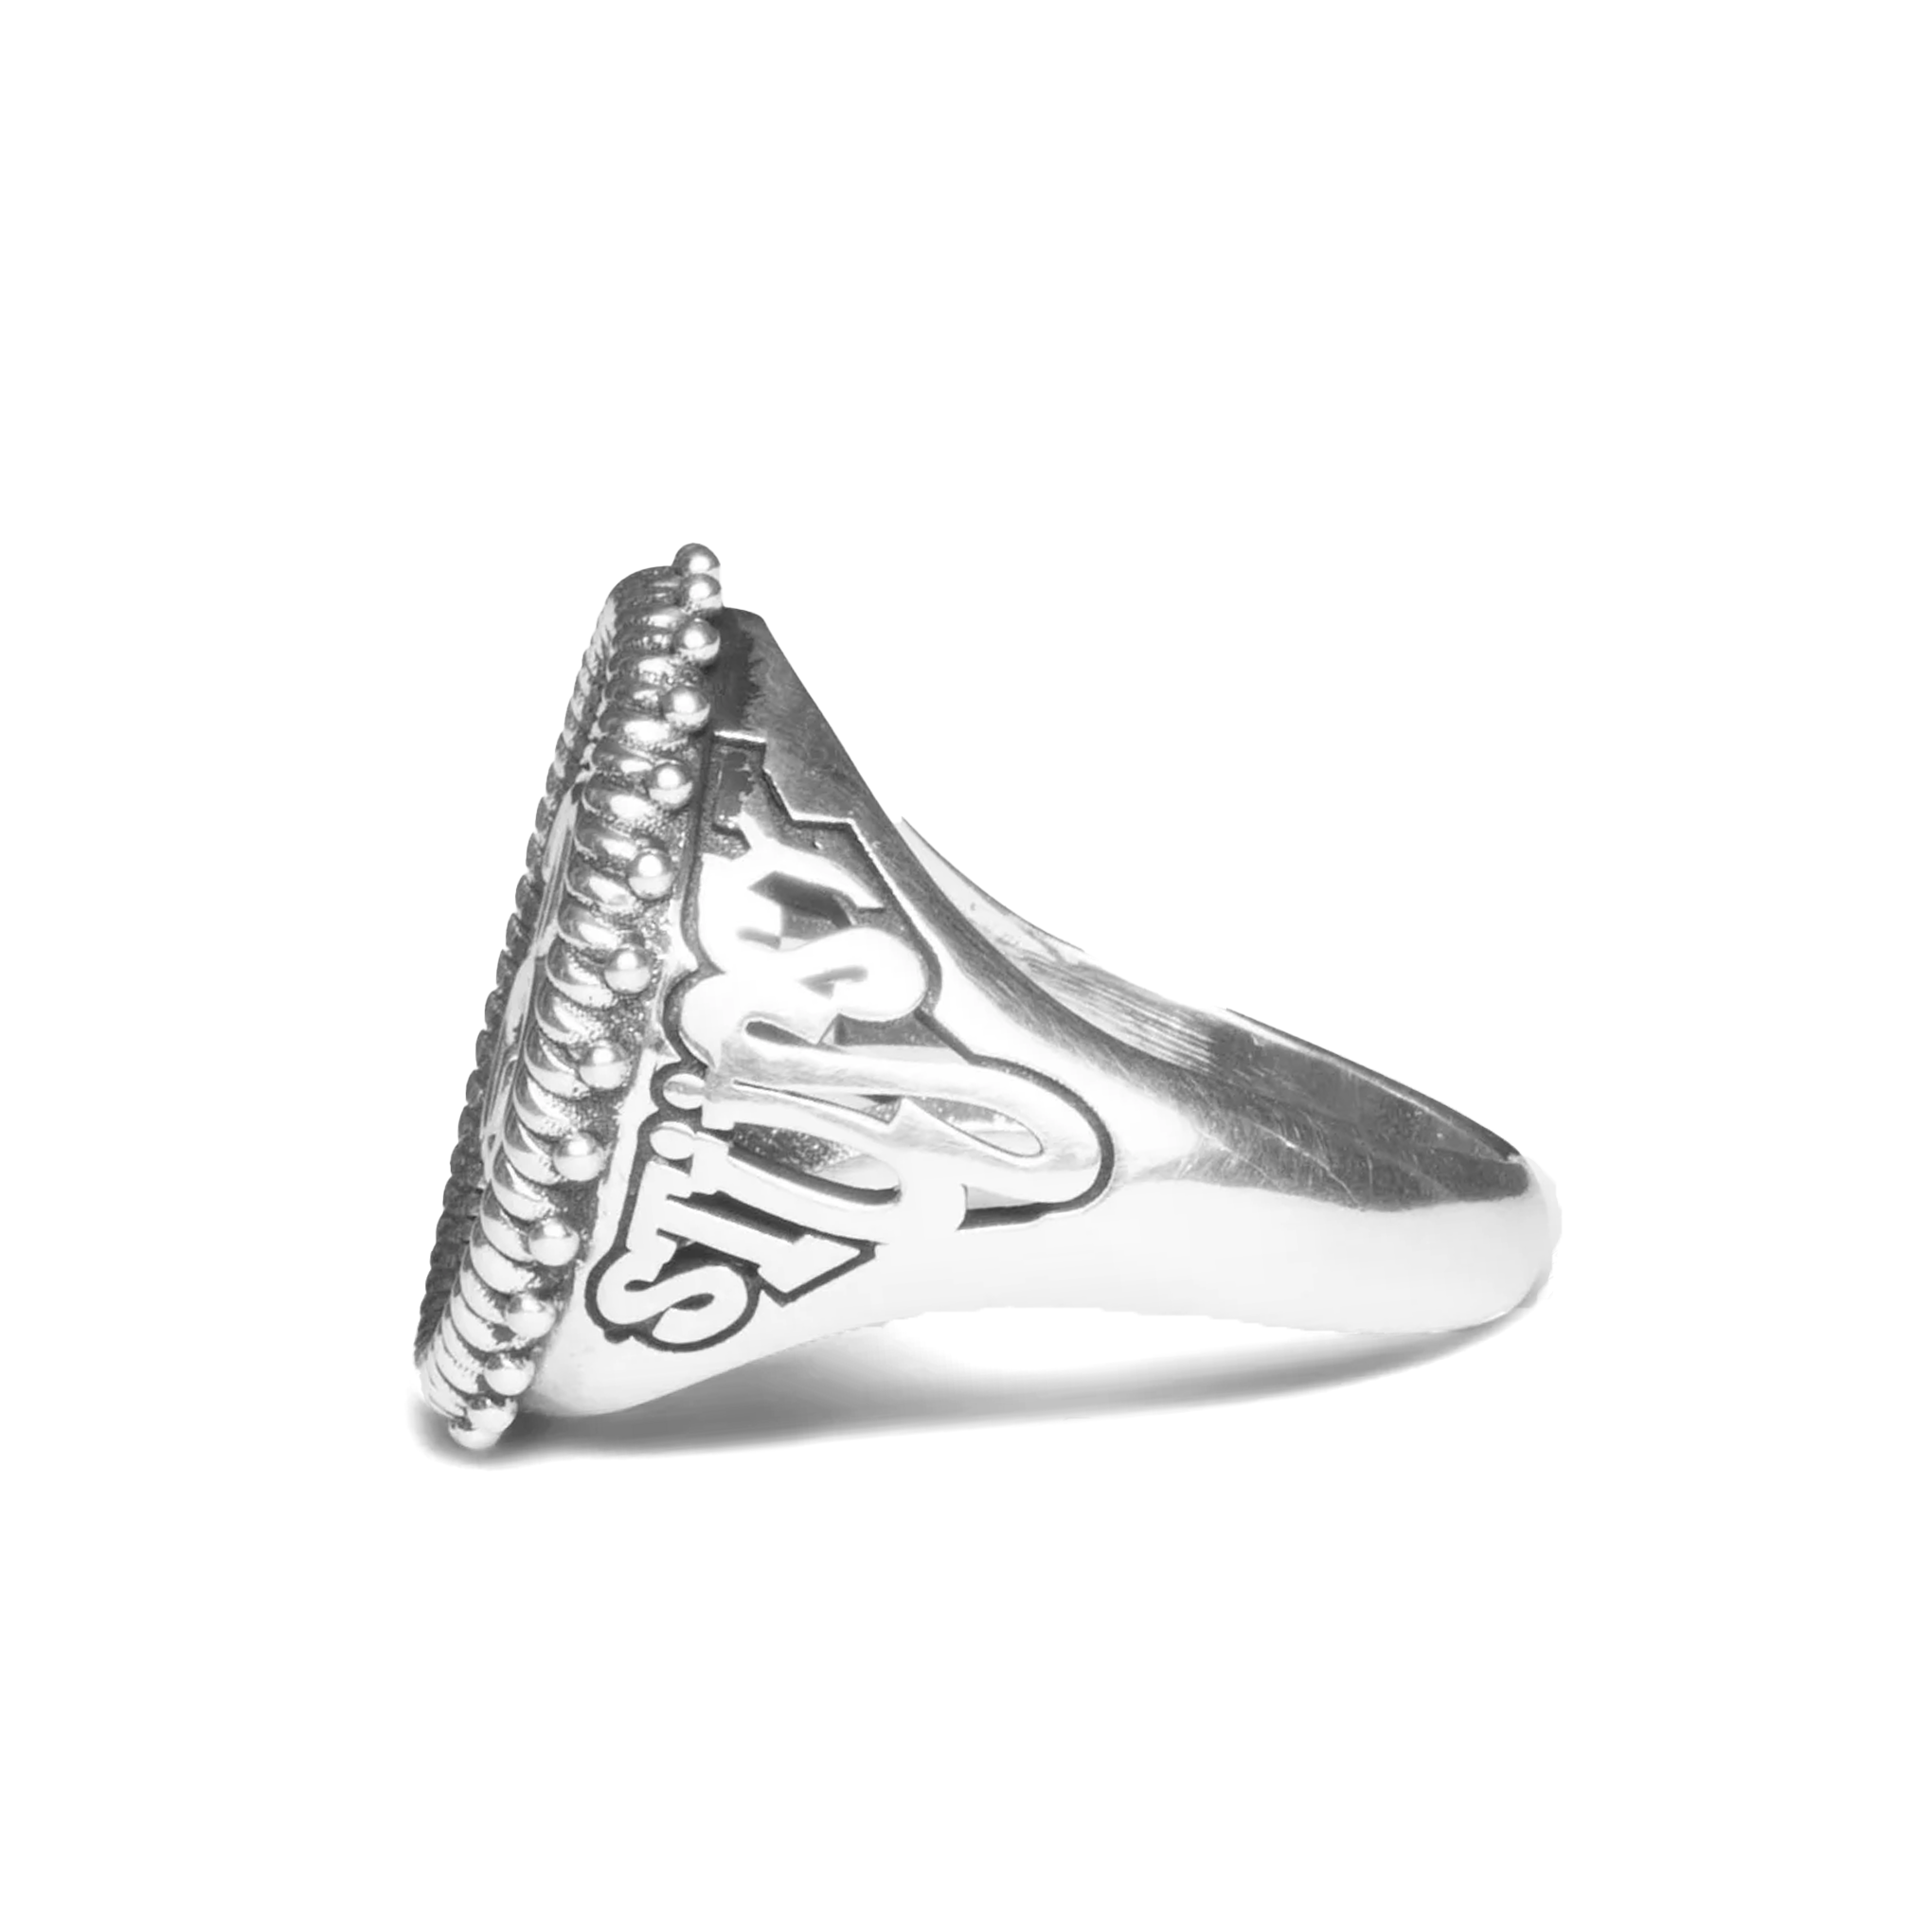 STUSSY SOVEREIGN RING STERLING SILVER